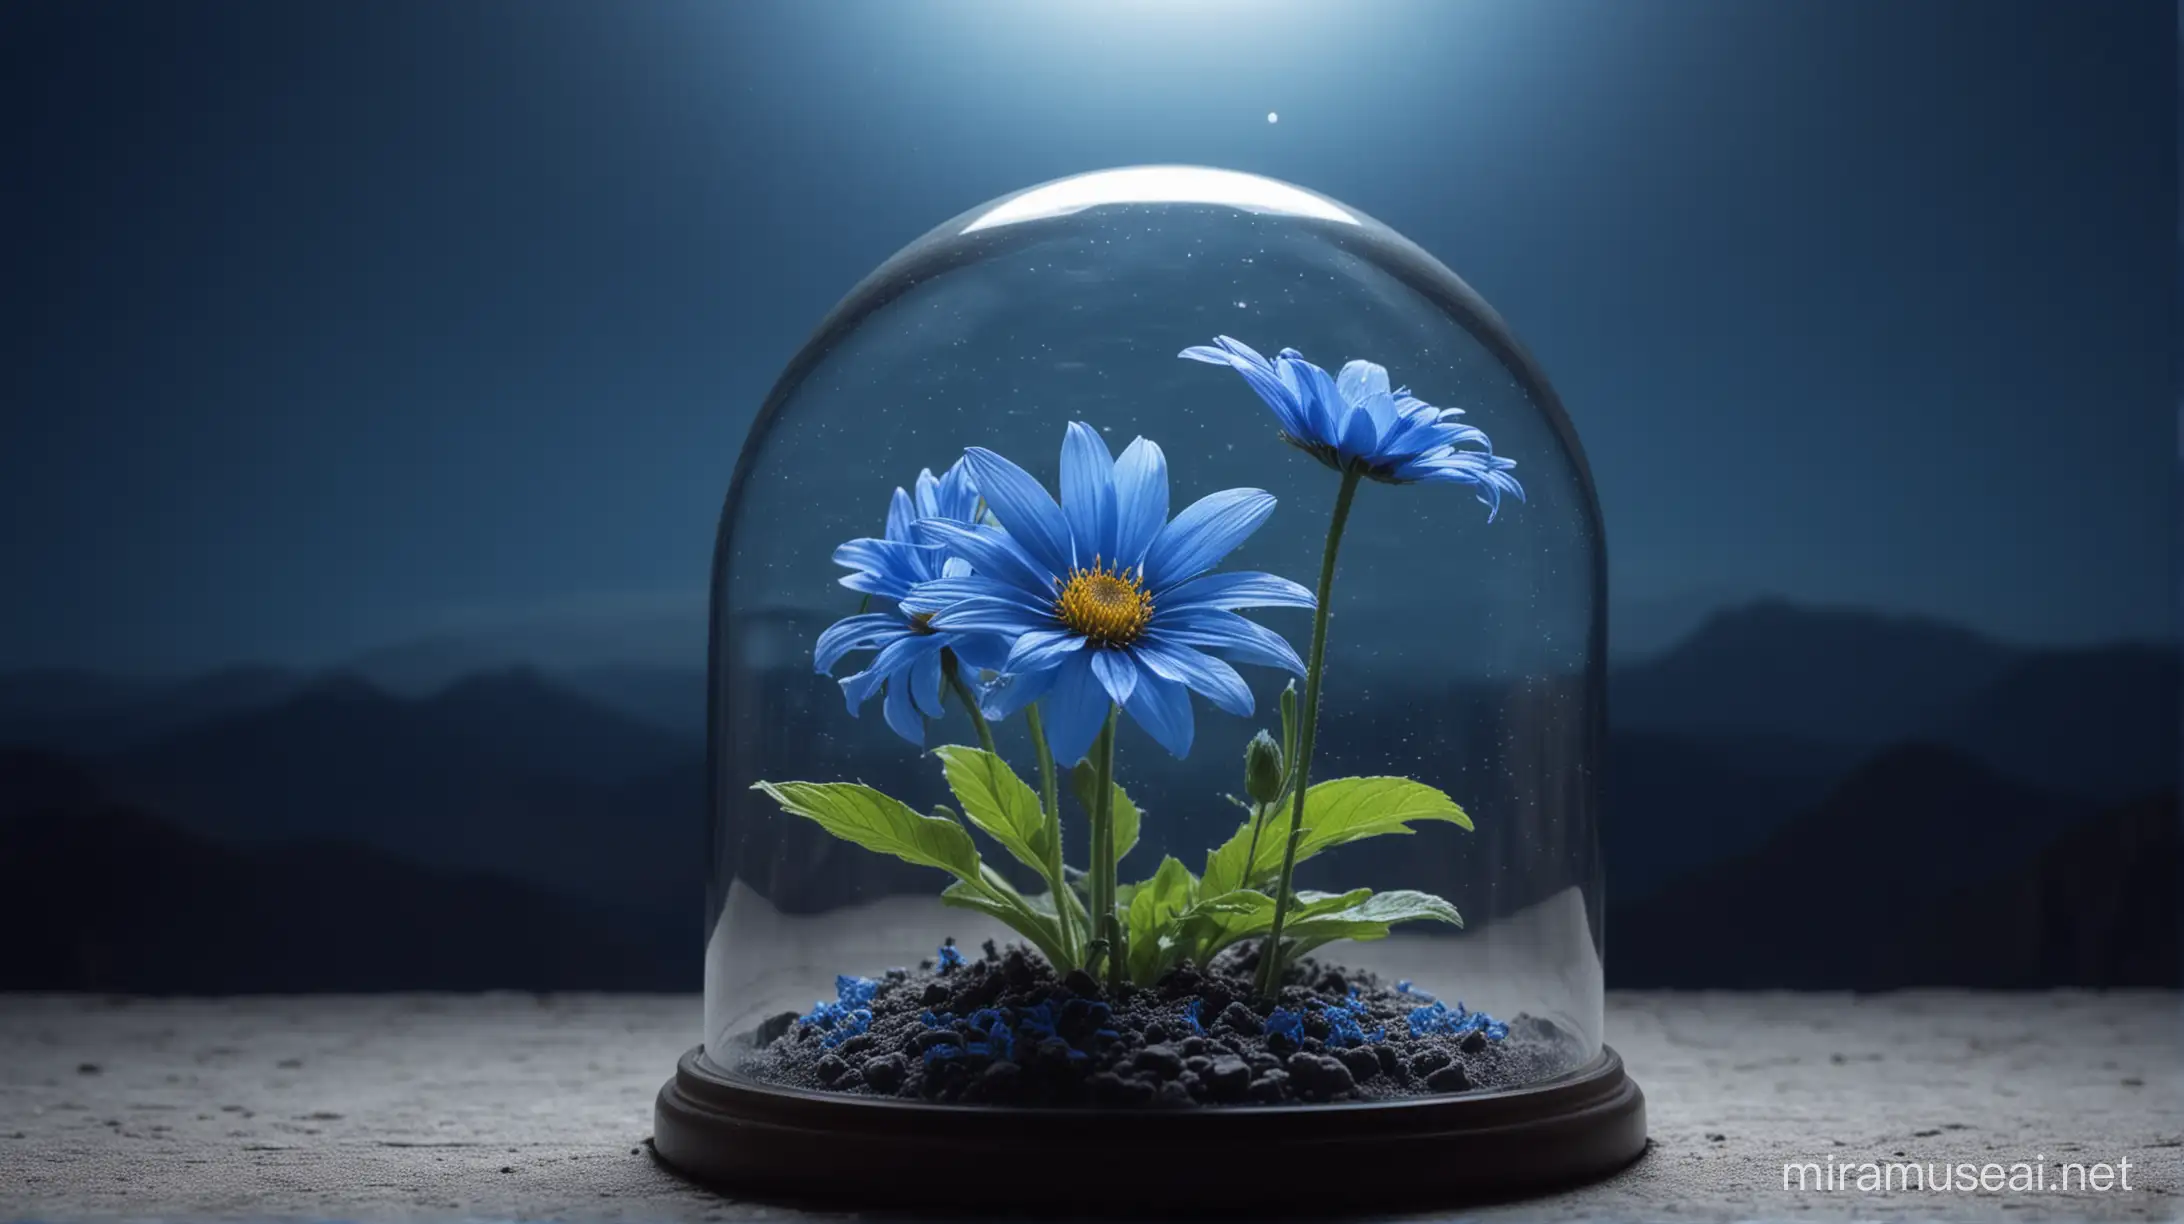 Blue flower under glass dome. Background Moon surface.